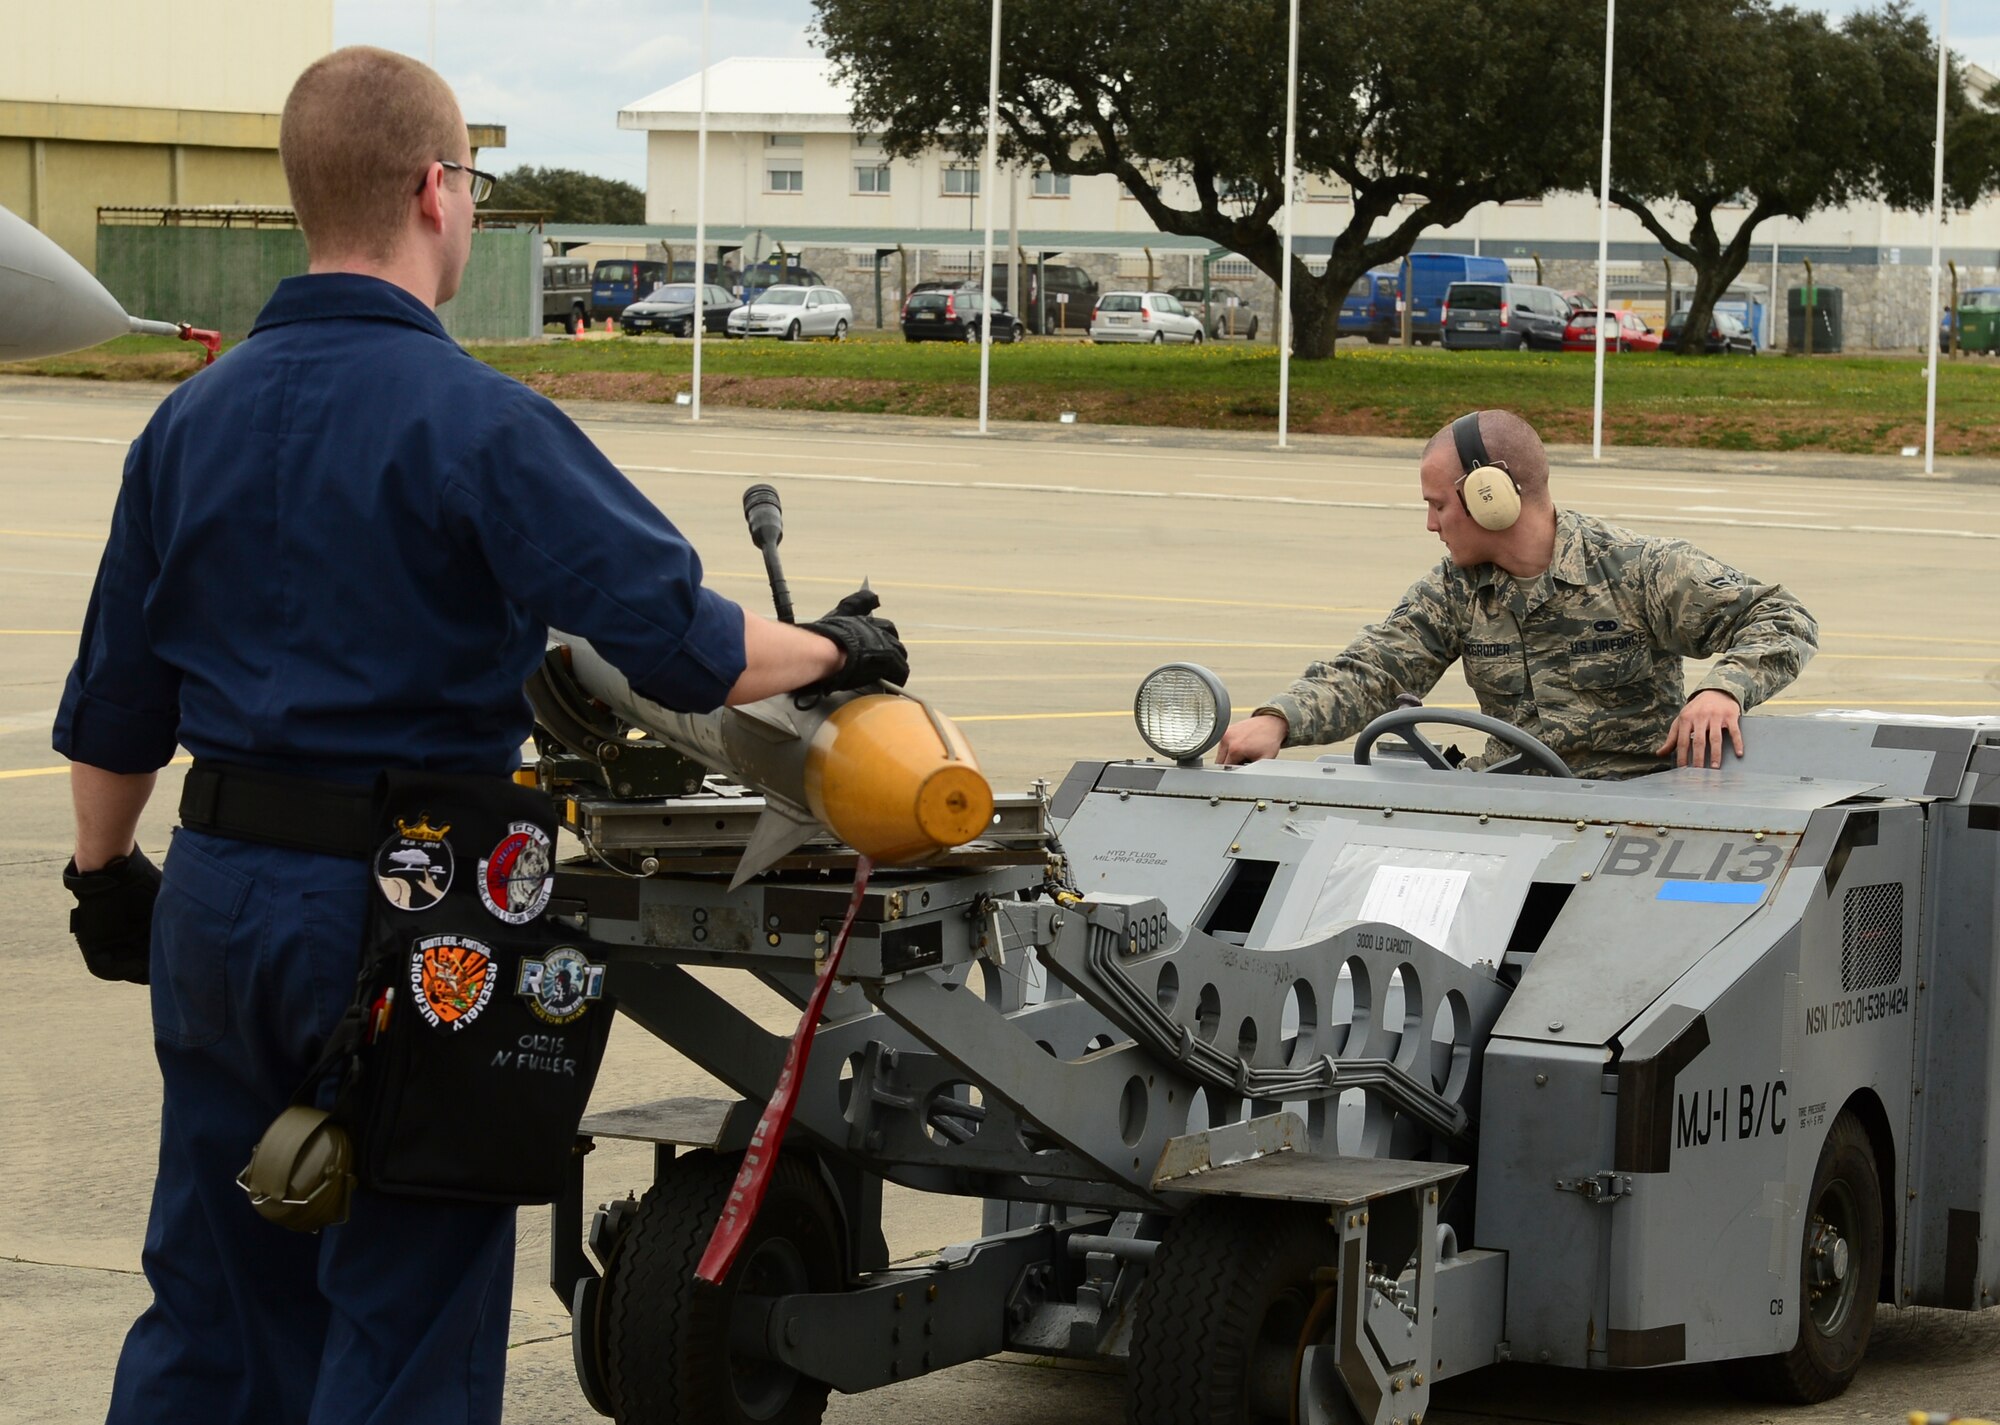 Senior Airman Noah Fuller and Airman 1st Class Edward McGroder, 493rd Aircraft Maintenance Unit weapons load crew members, transport simulated munitions on an MJ-1 Lift Truck during exercise Real Thaw at Beja Air Base, Portugal, Feb. 25, 2016. Real Thaw was designed to provide joint interoperability training throughout the execution of a vast range of battlefield missions, to include day and night operations in a high-intensity joint setting. (U.S. Air Force photo by Senior Airman Dawn M. Weber/Released)